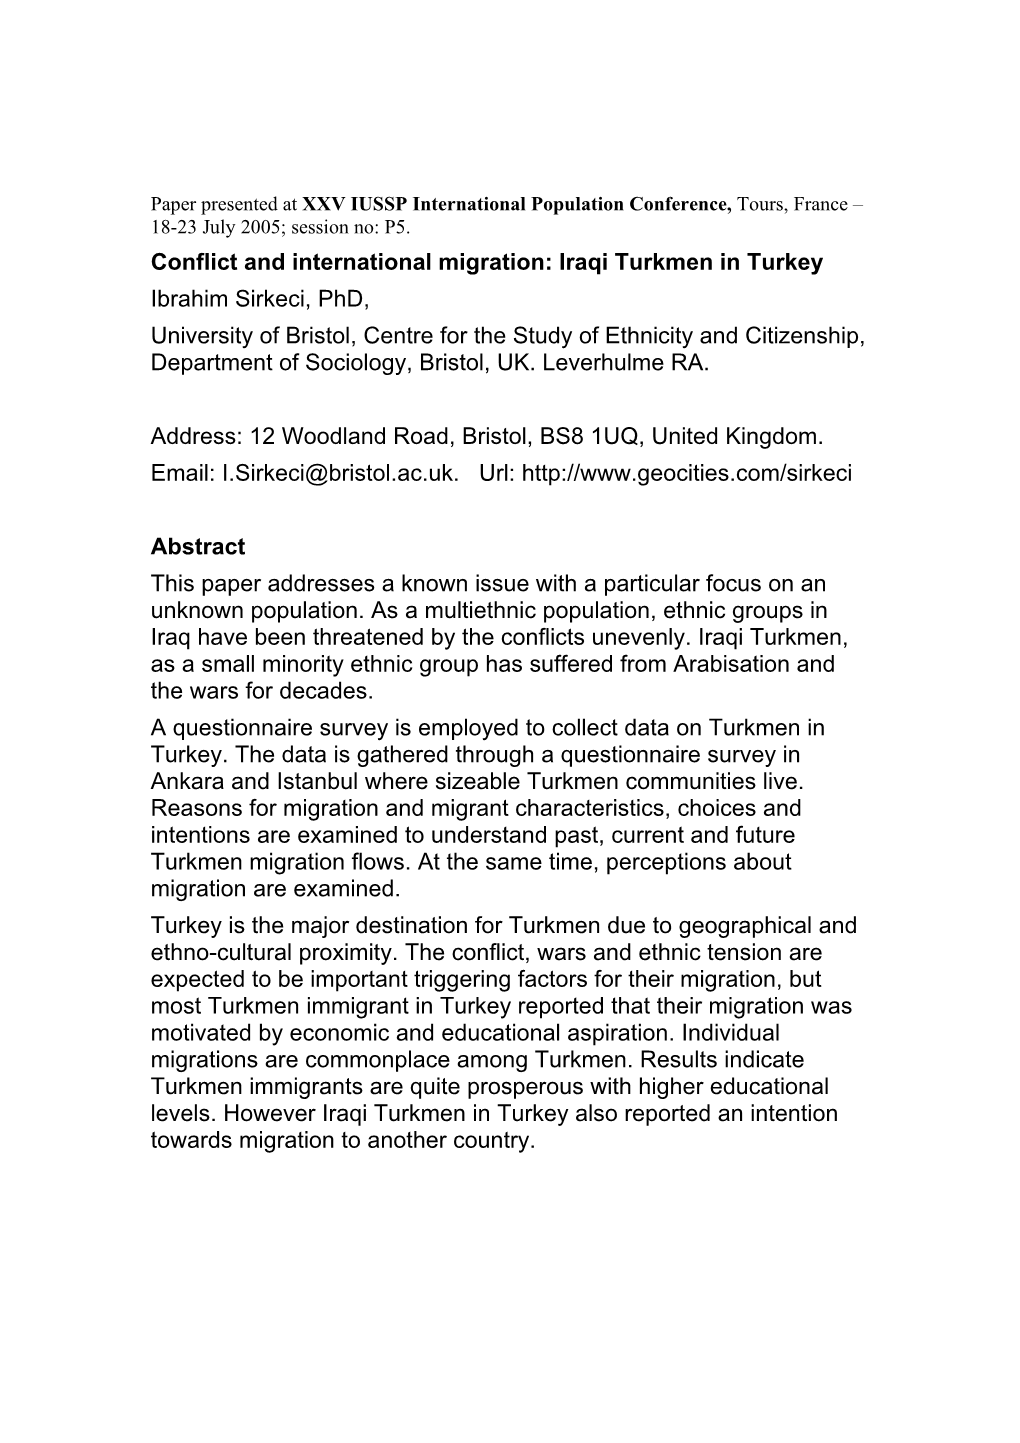 Conflict and International Migration